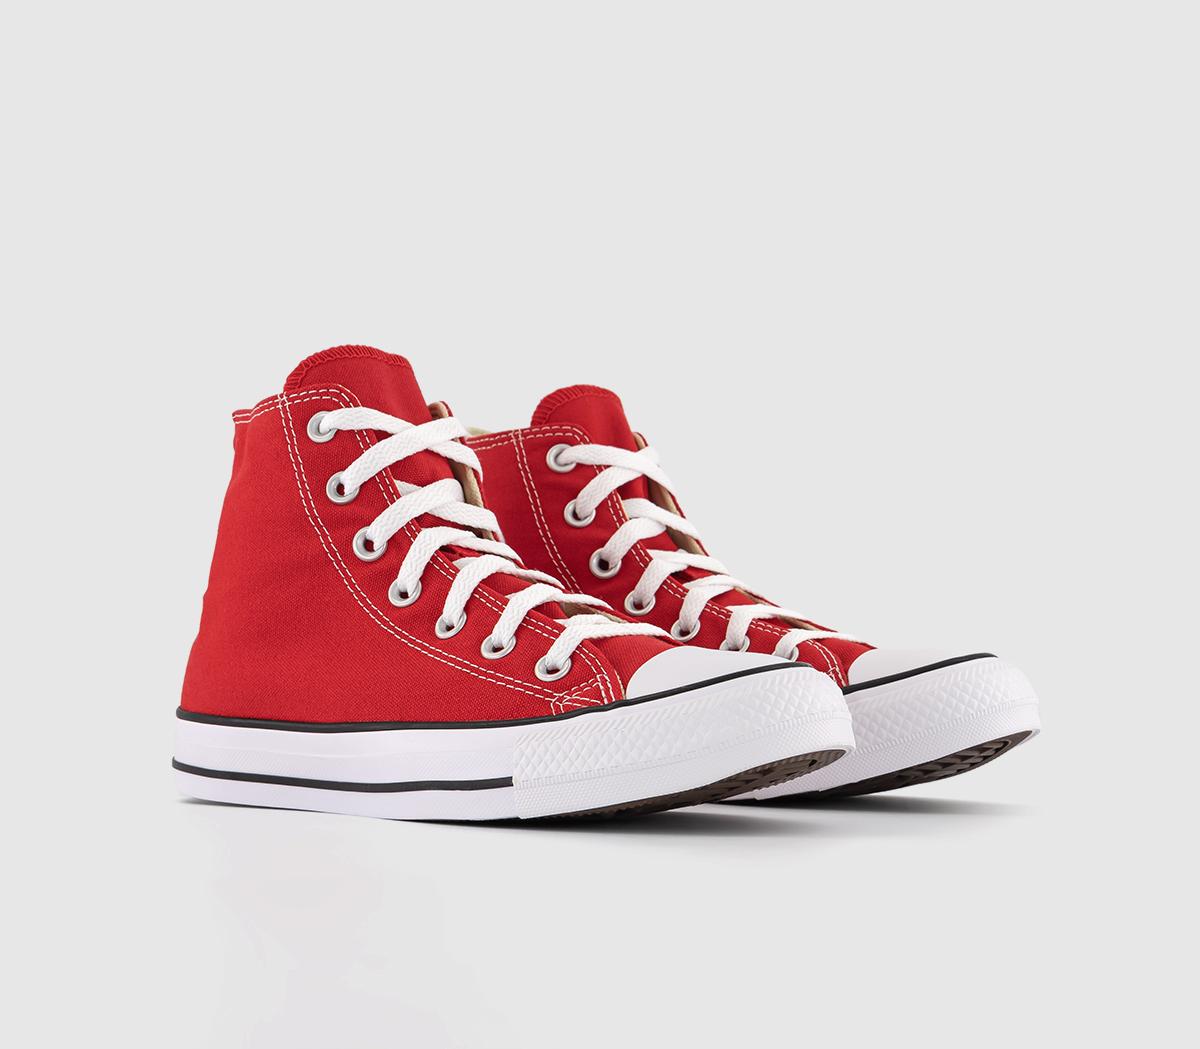 Converse Classic All Star Hi Red Canvas Trainers, 10